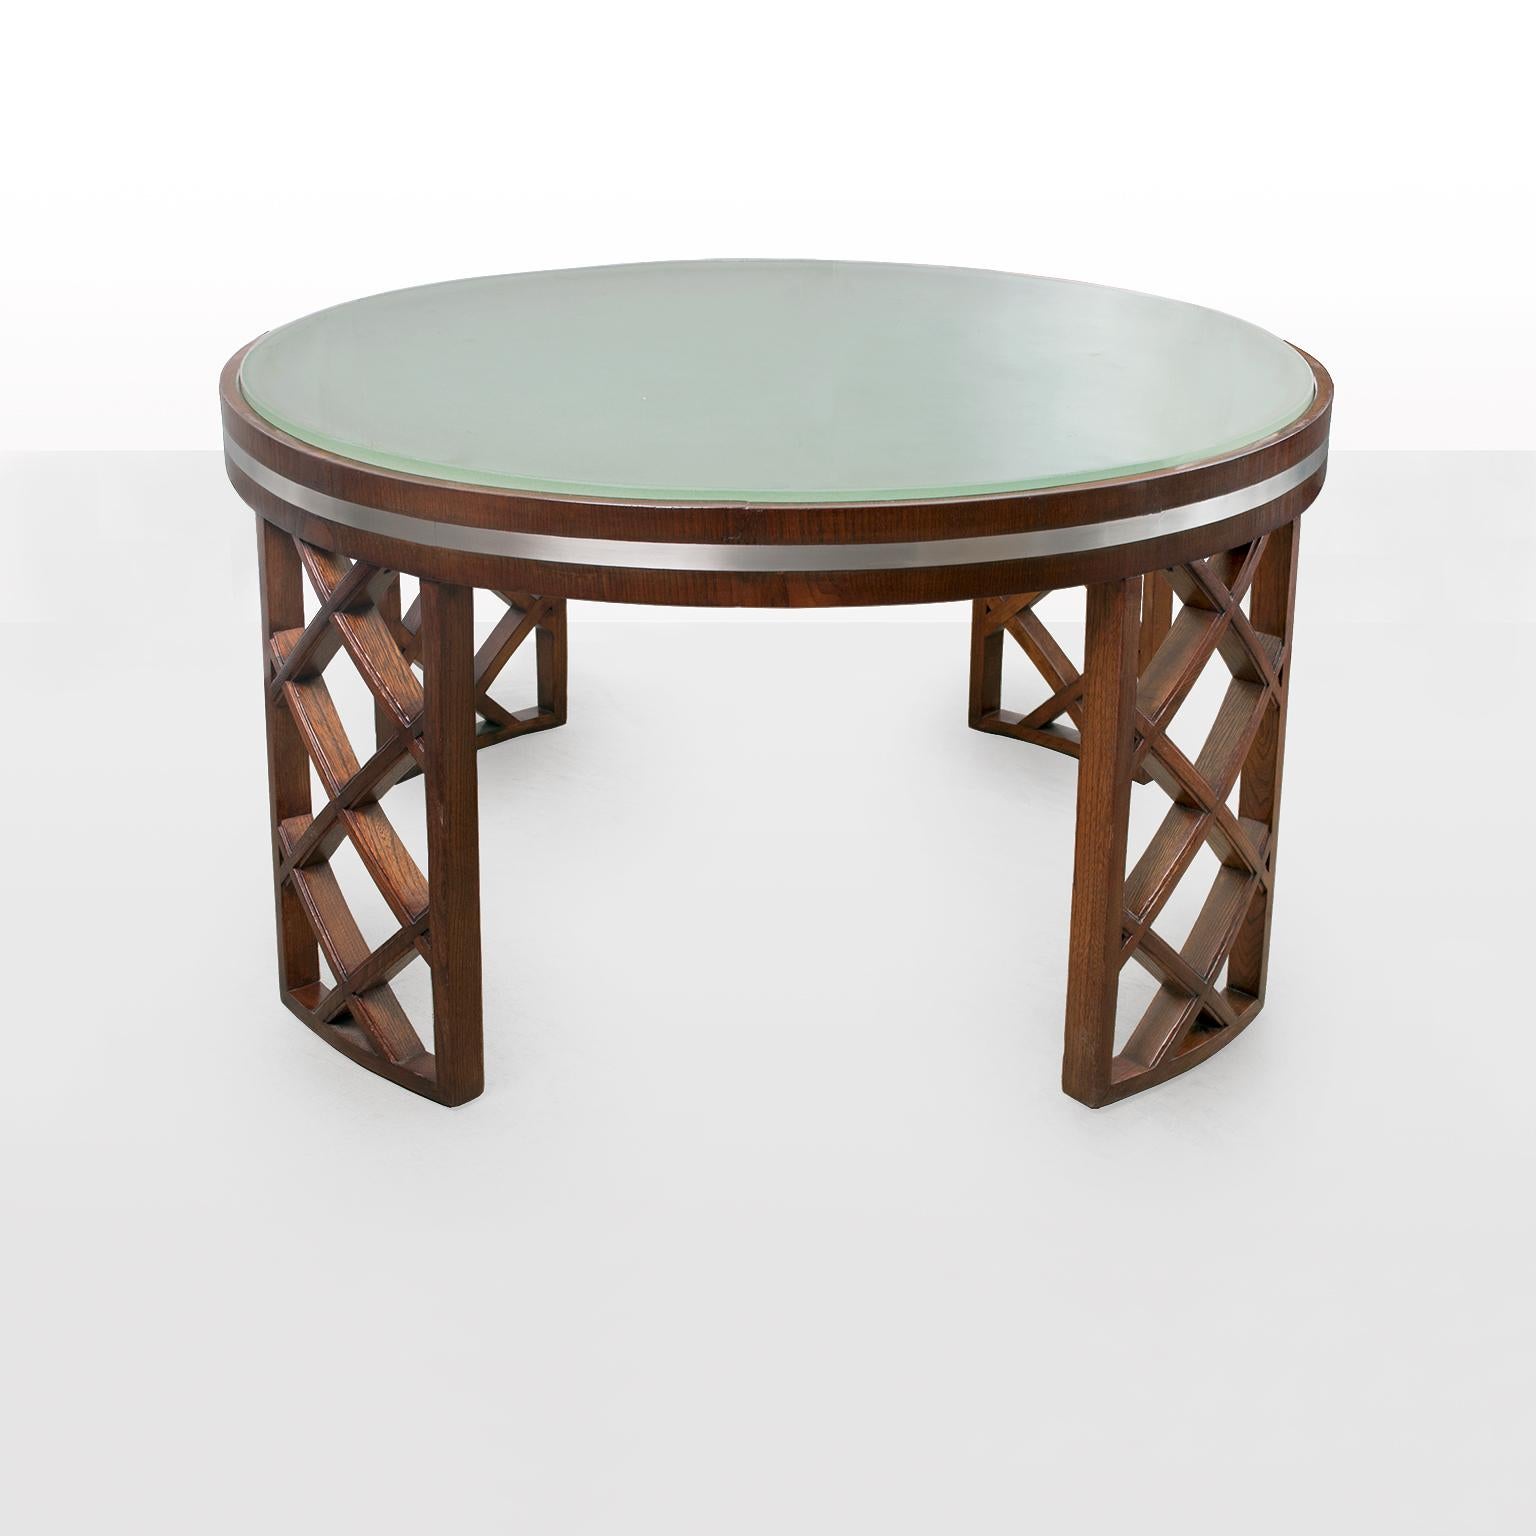 Swedish Art Deco coffee table in stained elmwood. Legs are constructed with a lattice framework. A band of metal accents the top which has a heavy acid etched glass top inserted. Measure: Diameter 37.5